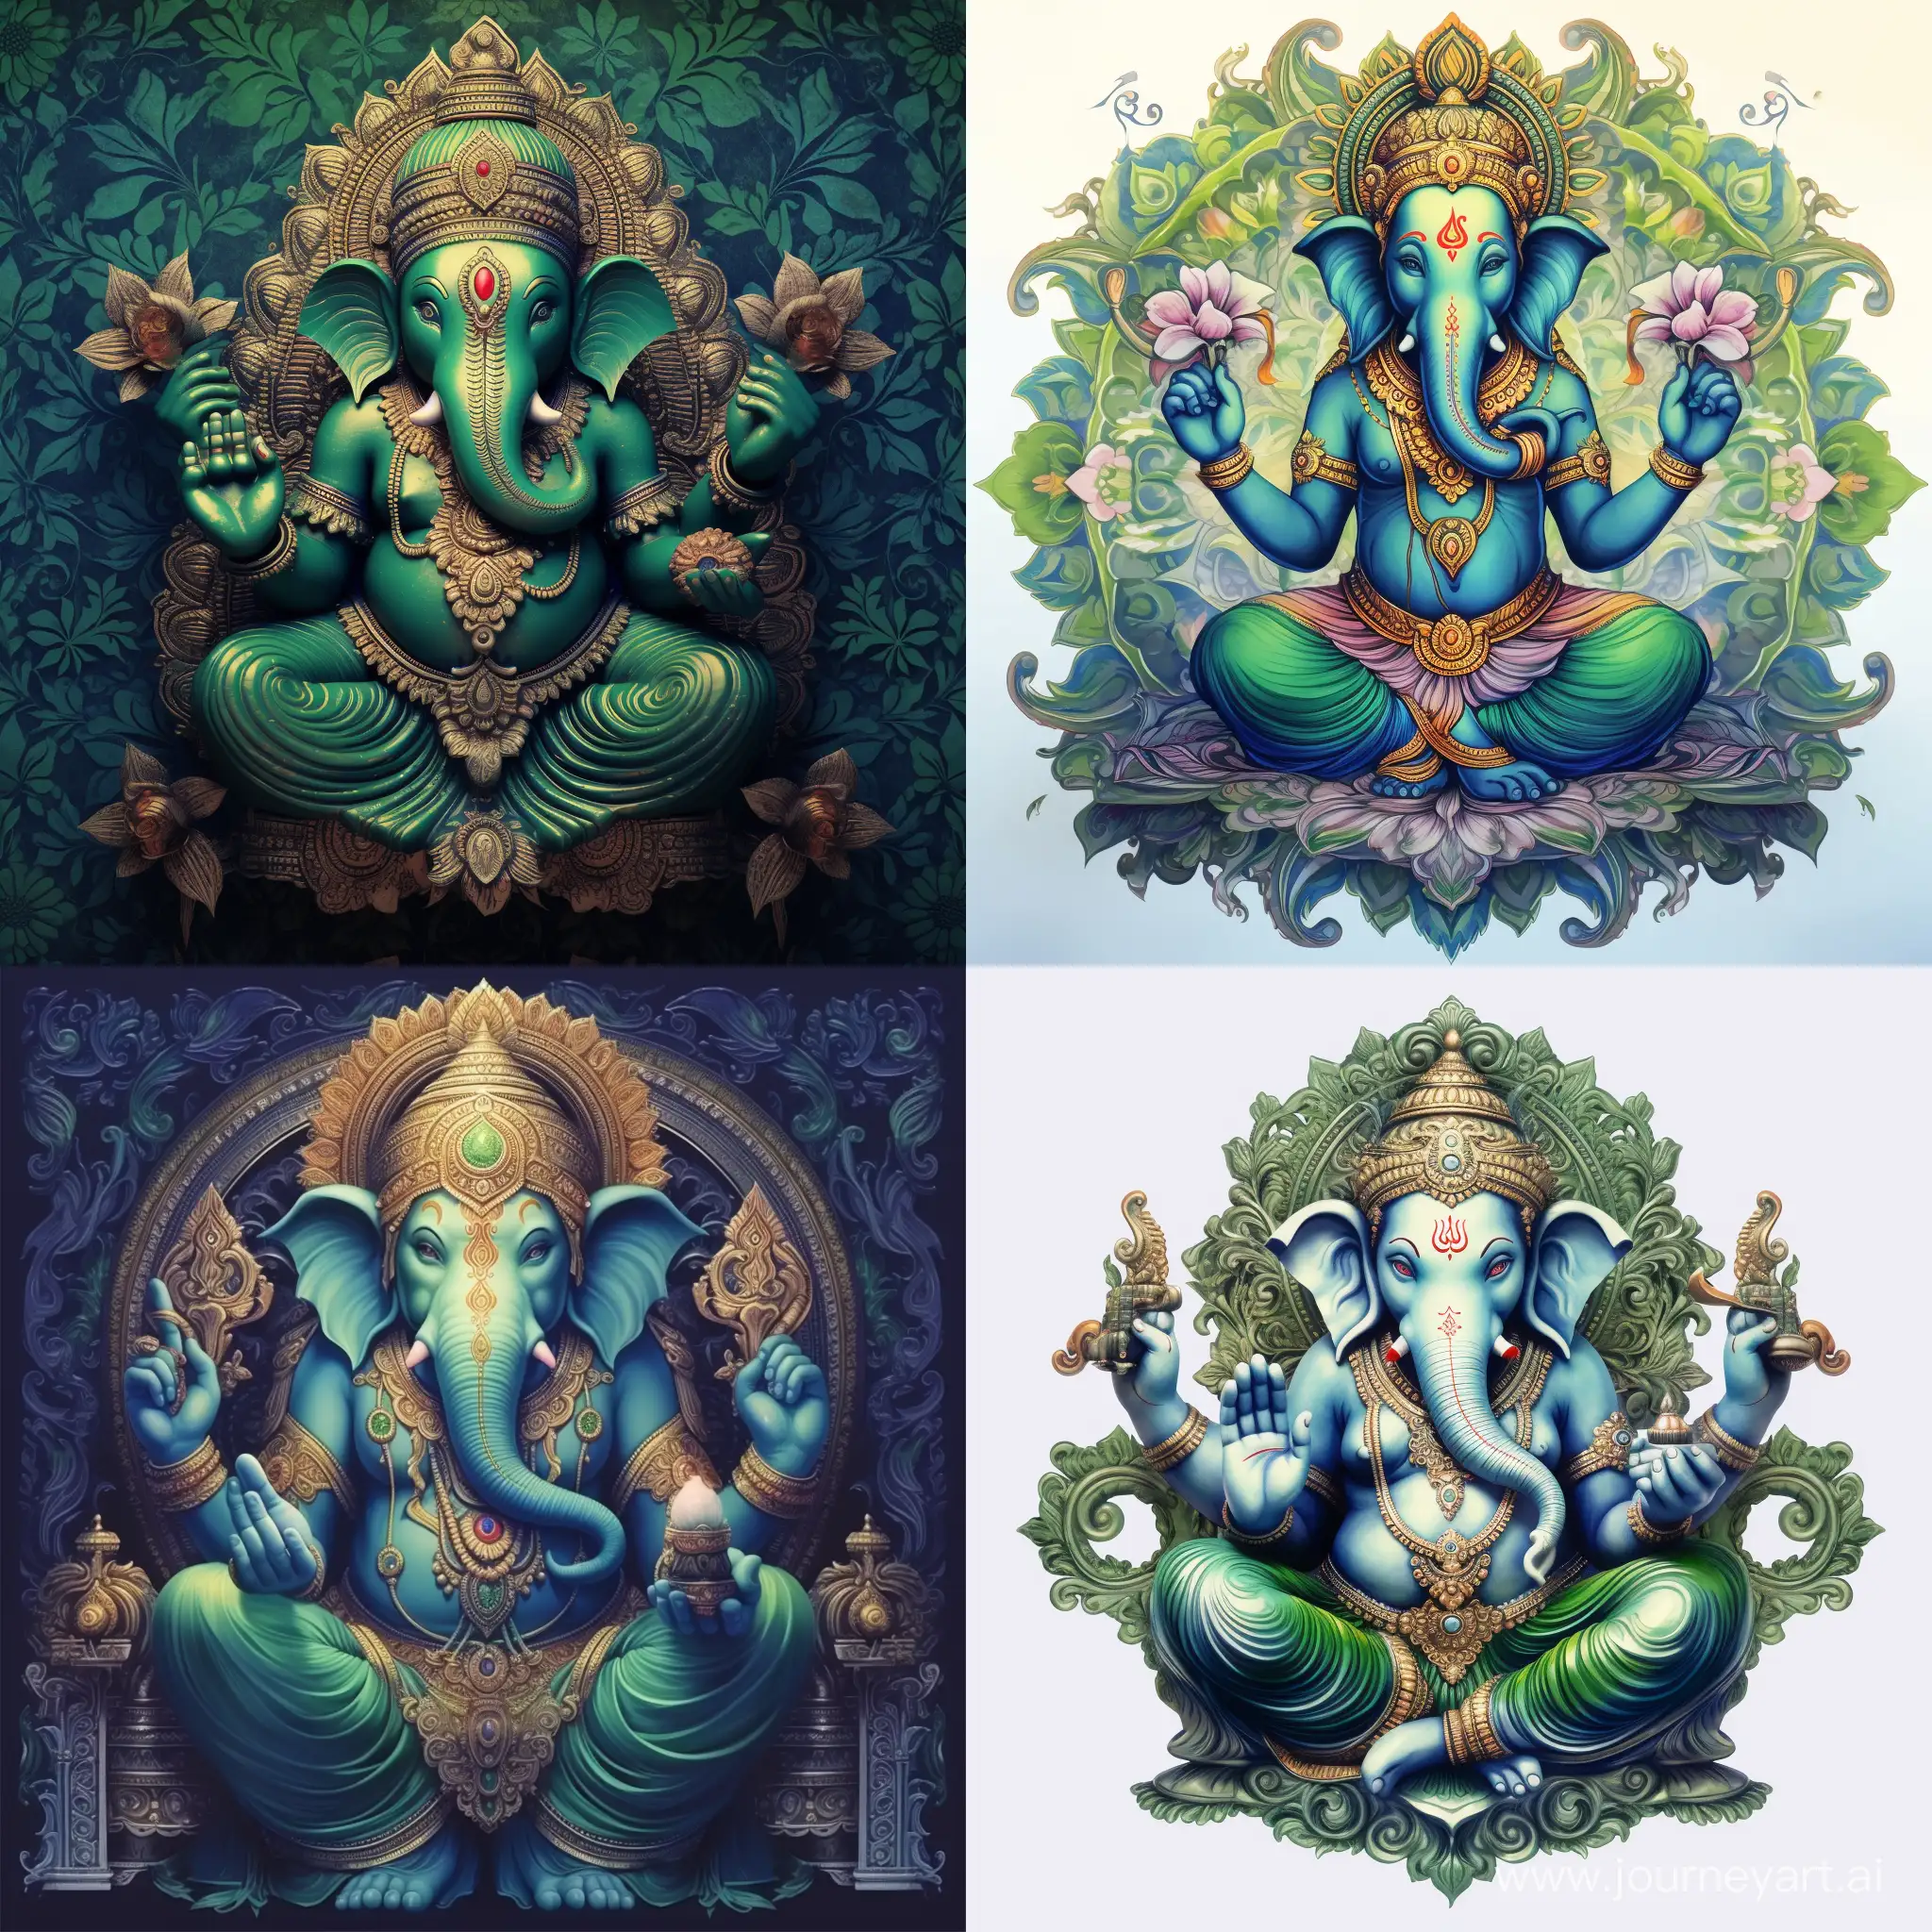 Peaceful-Slim-Ganesha-in-Seated-Meditation-with-Mandala-in-Tranquil-Green-and-Blue-Tones